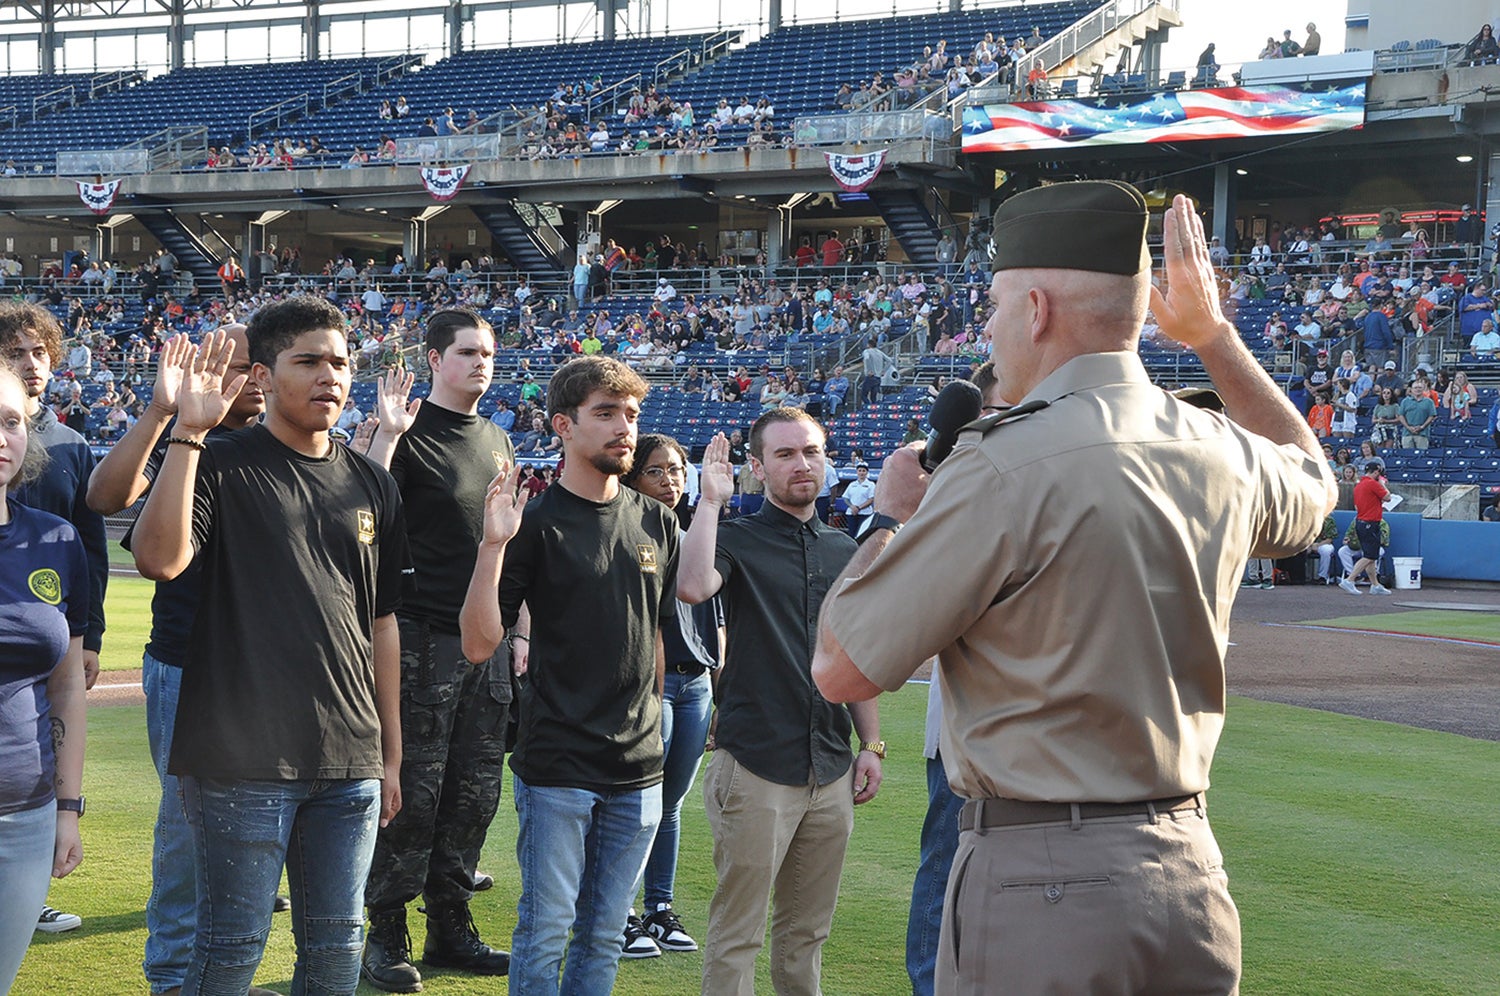 Maj. Gen. John Kline, commander of the U.S. Army Center for Initial Military Training, swears in 25 Army recruits at a Norfolk Tides Armed Forces Night baseball game in Norfolk, Virginia. (Credit: U.S. Army)